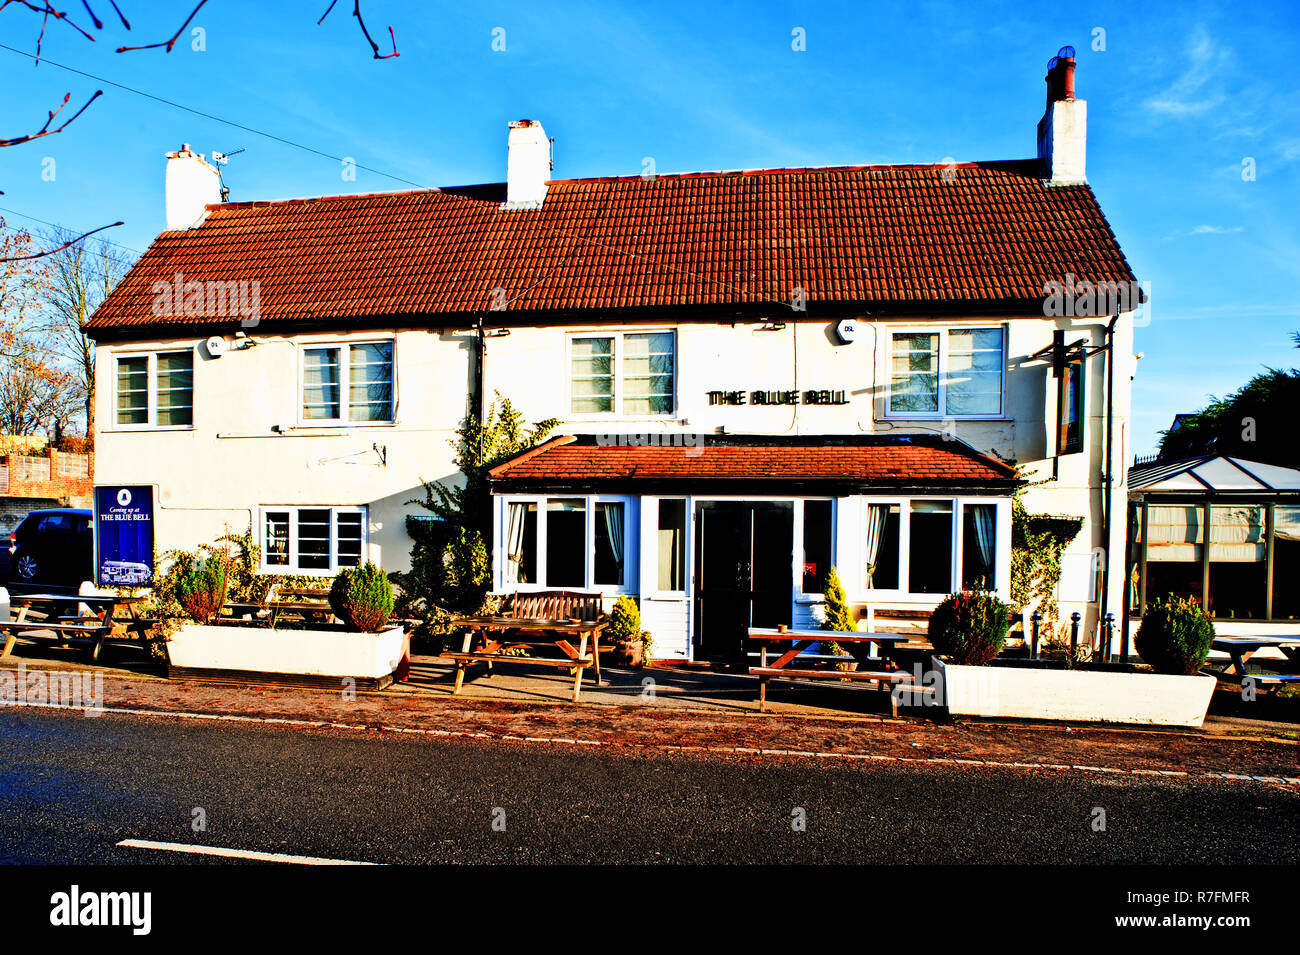 The Blue Bell, Bishopton, Stockton on Tees, Cleveland, England Stock Photo